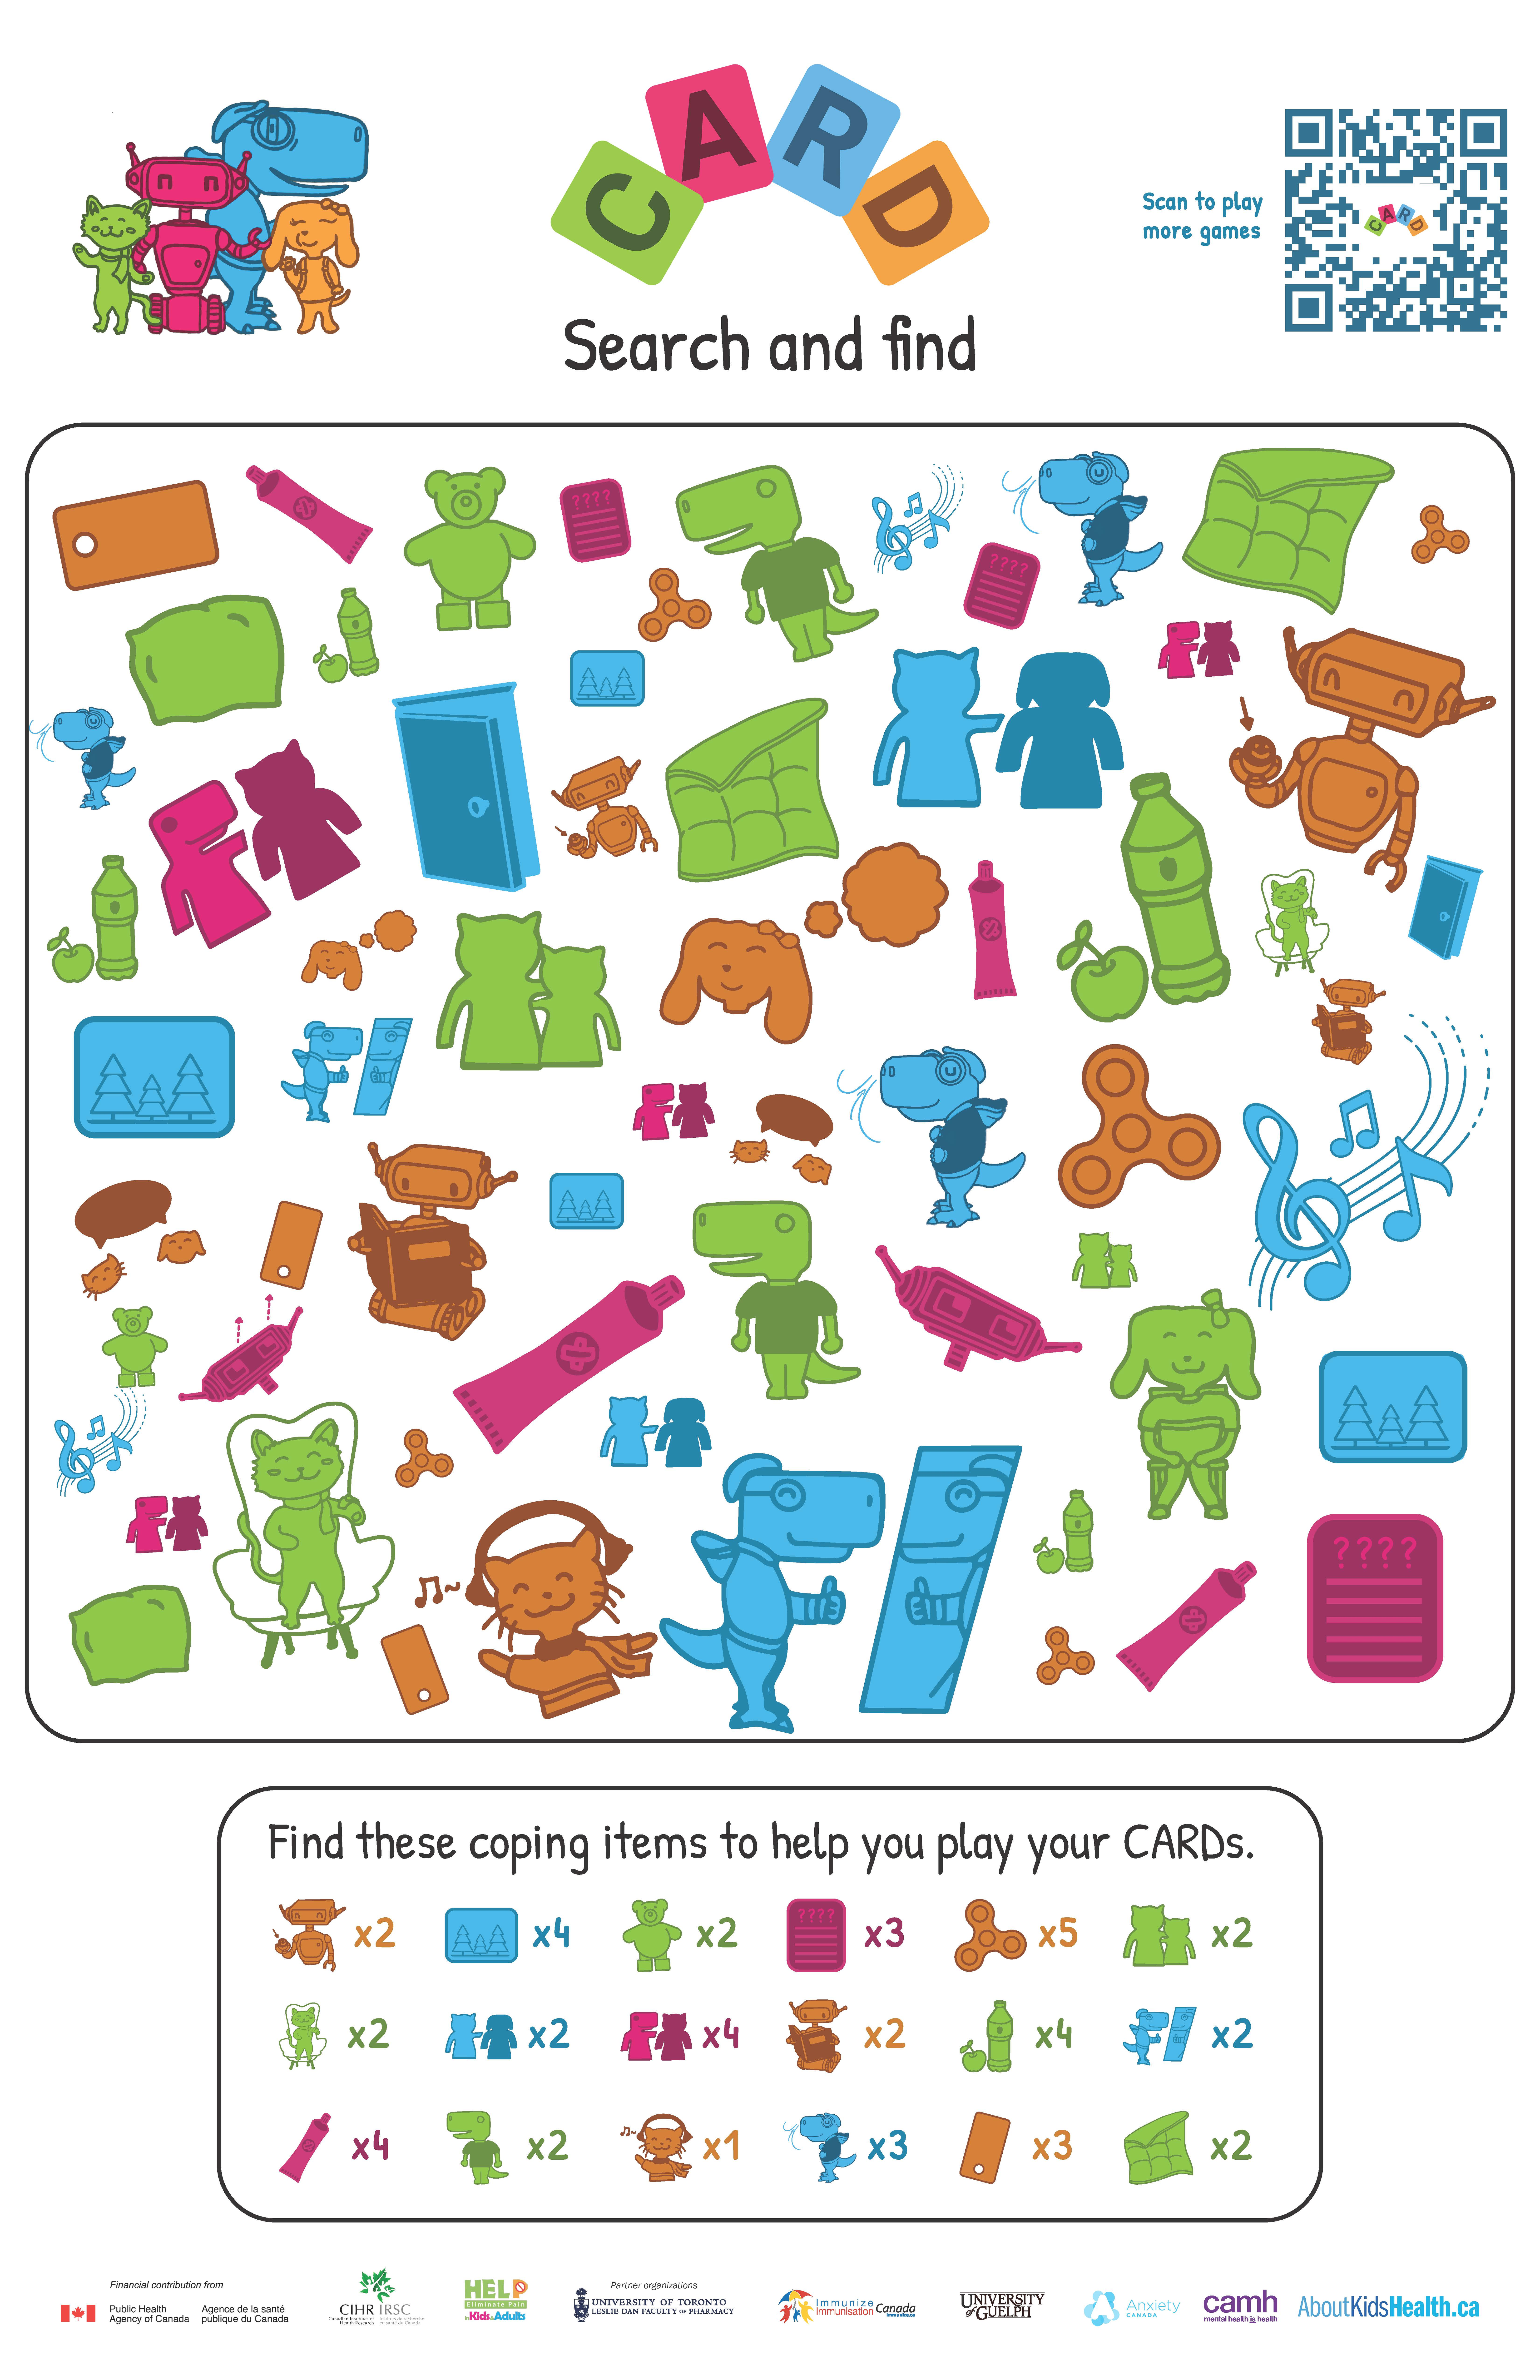 CARD Search and Find puzzle poster